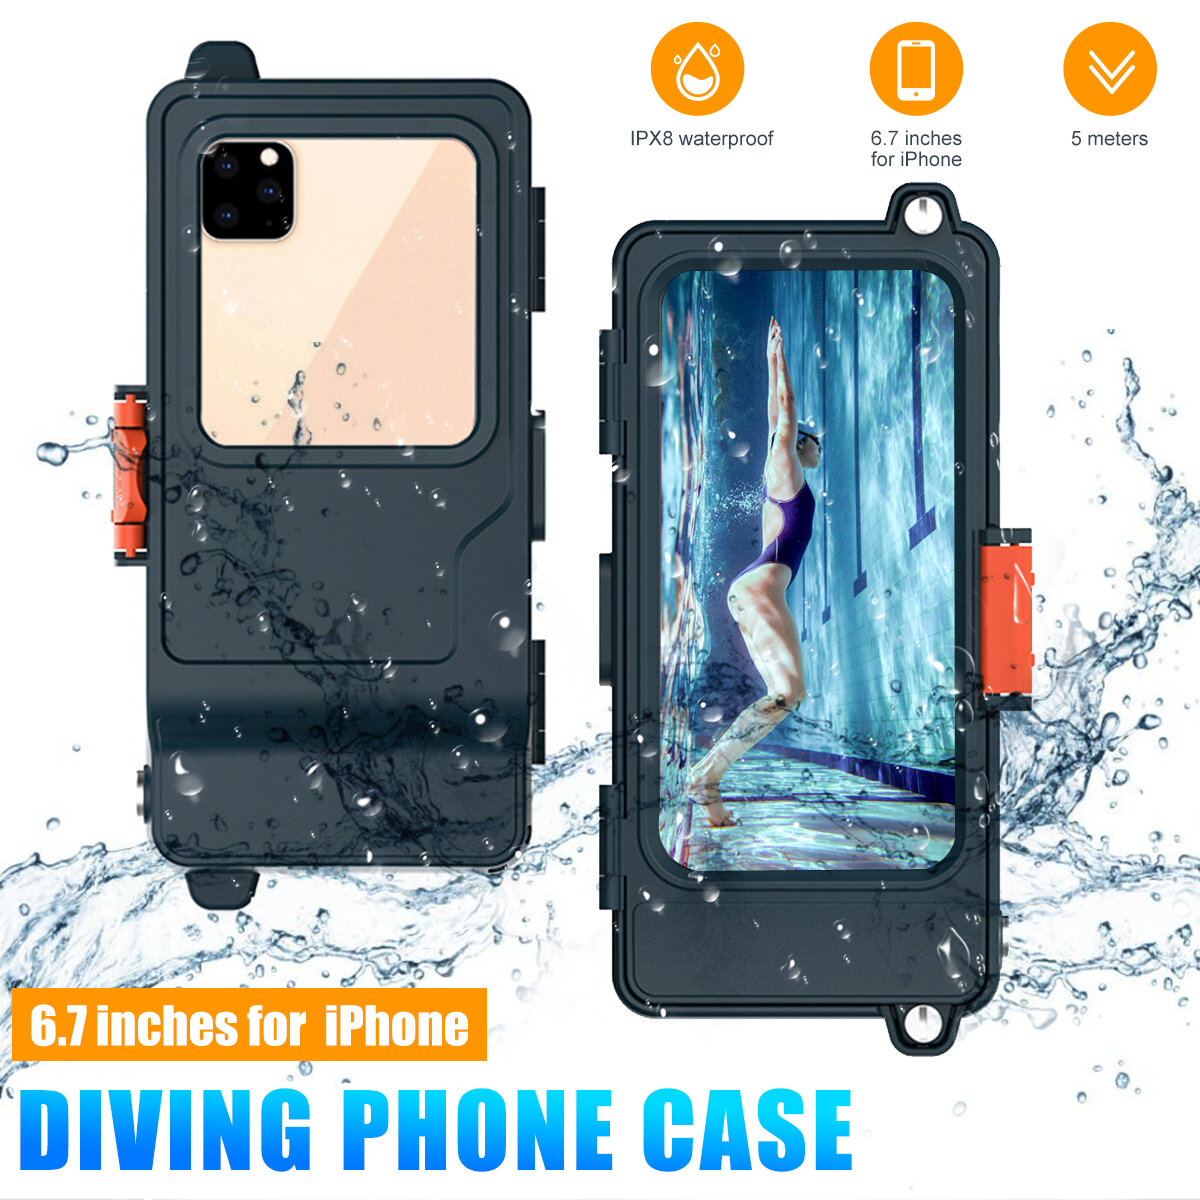 Bakeey 6.7 inch Professional IP68 Waterproof Mobile Phone Case with Transparent Window Take Picture 